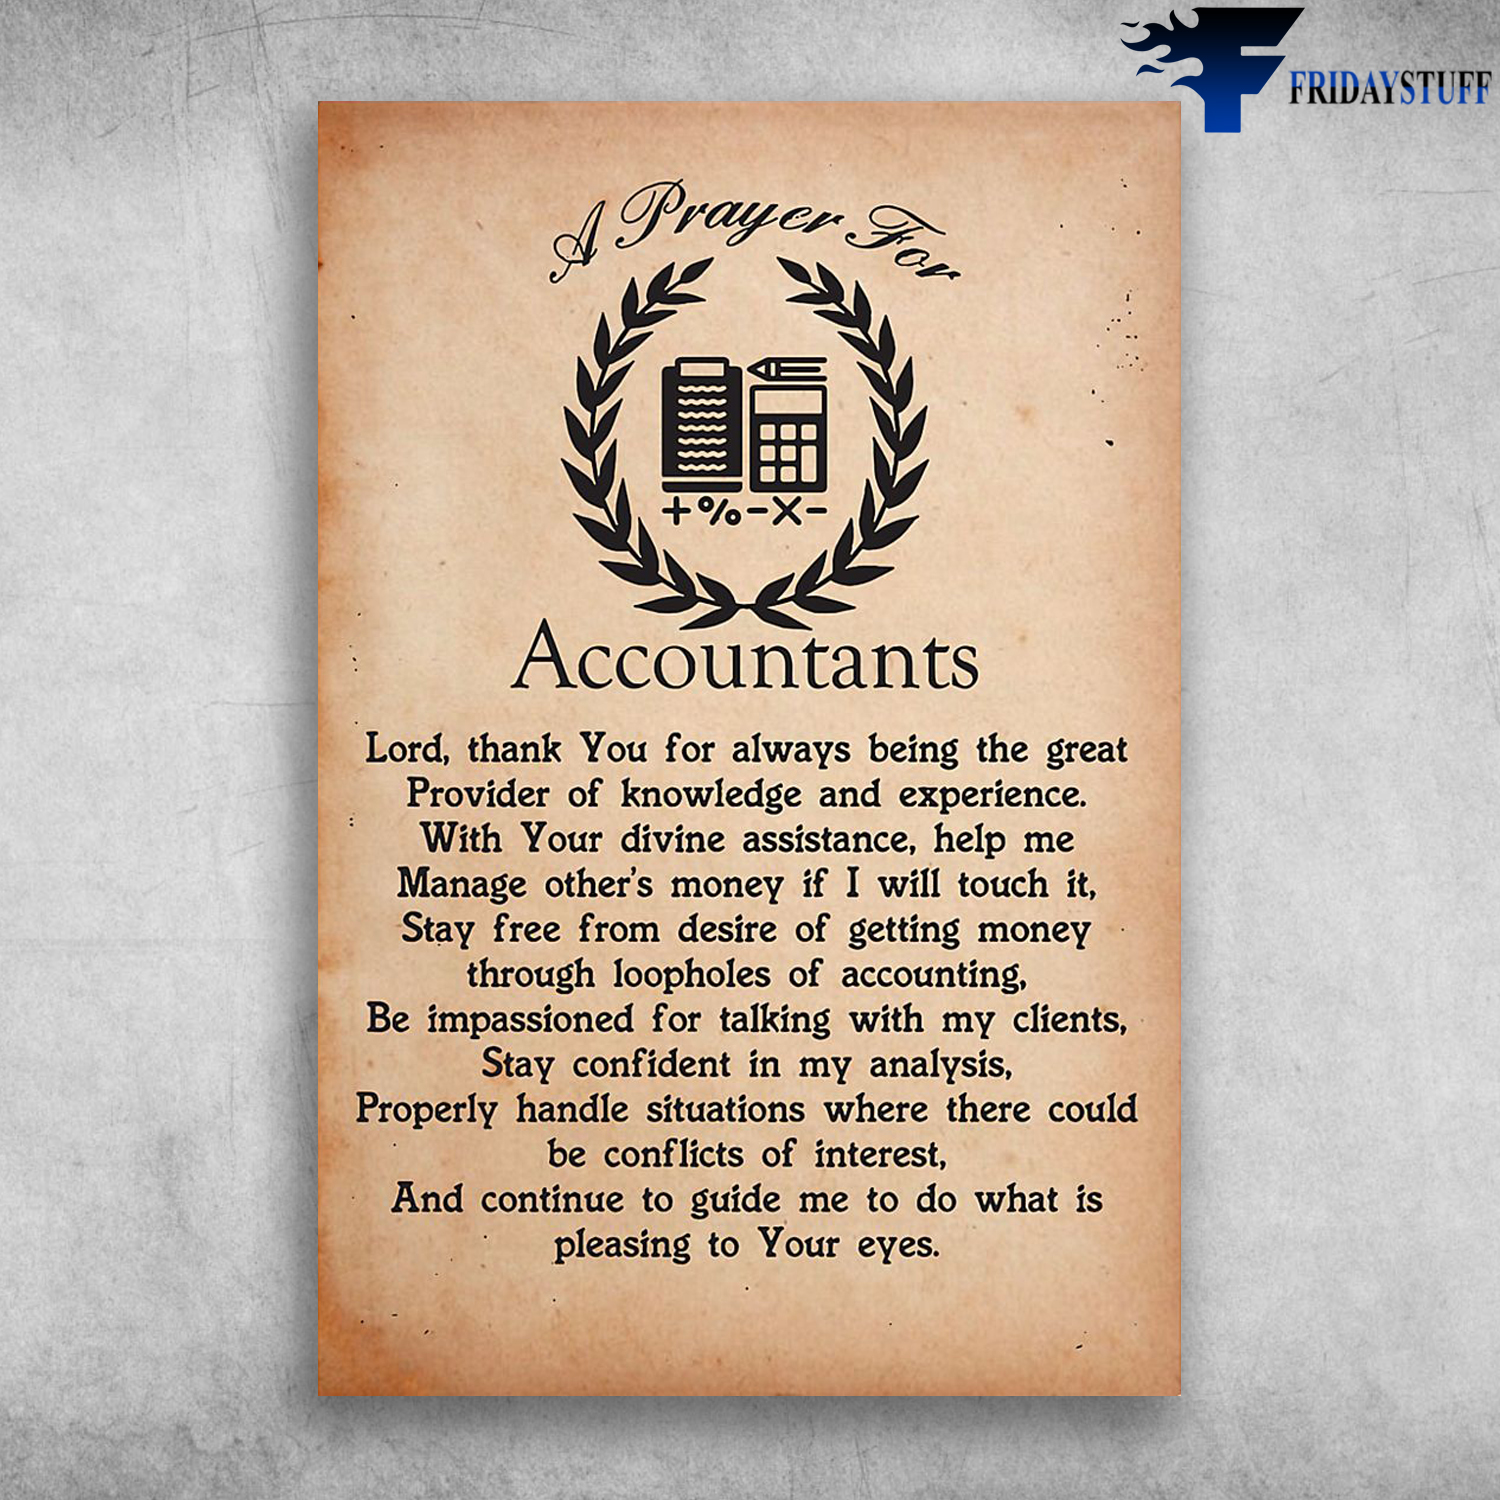 A Prayer For Accountants Lord Thank You For Always Being The Great Provider